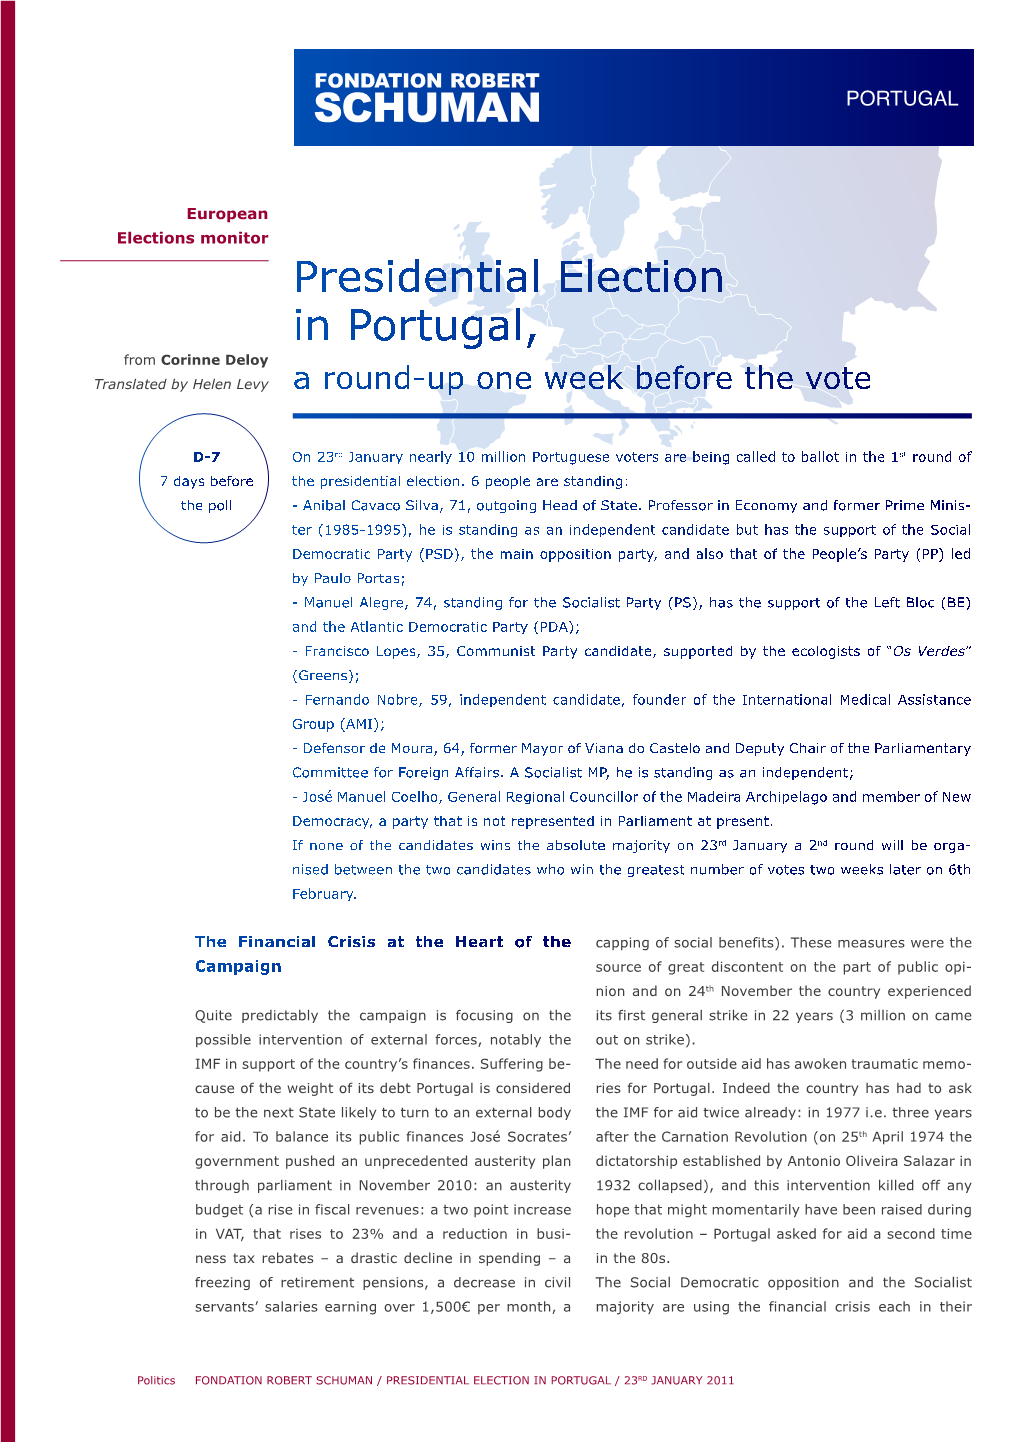 Presidential Election in Portugal, from Corinne Deloy Translated by Helen Levy a Round-Up One Week Before the Vote